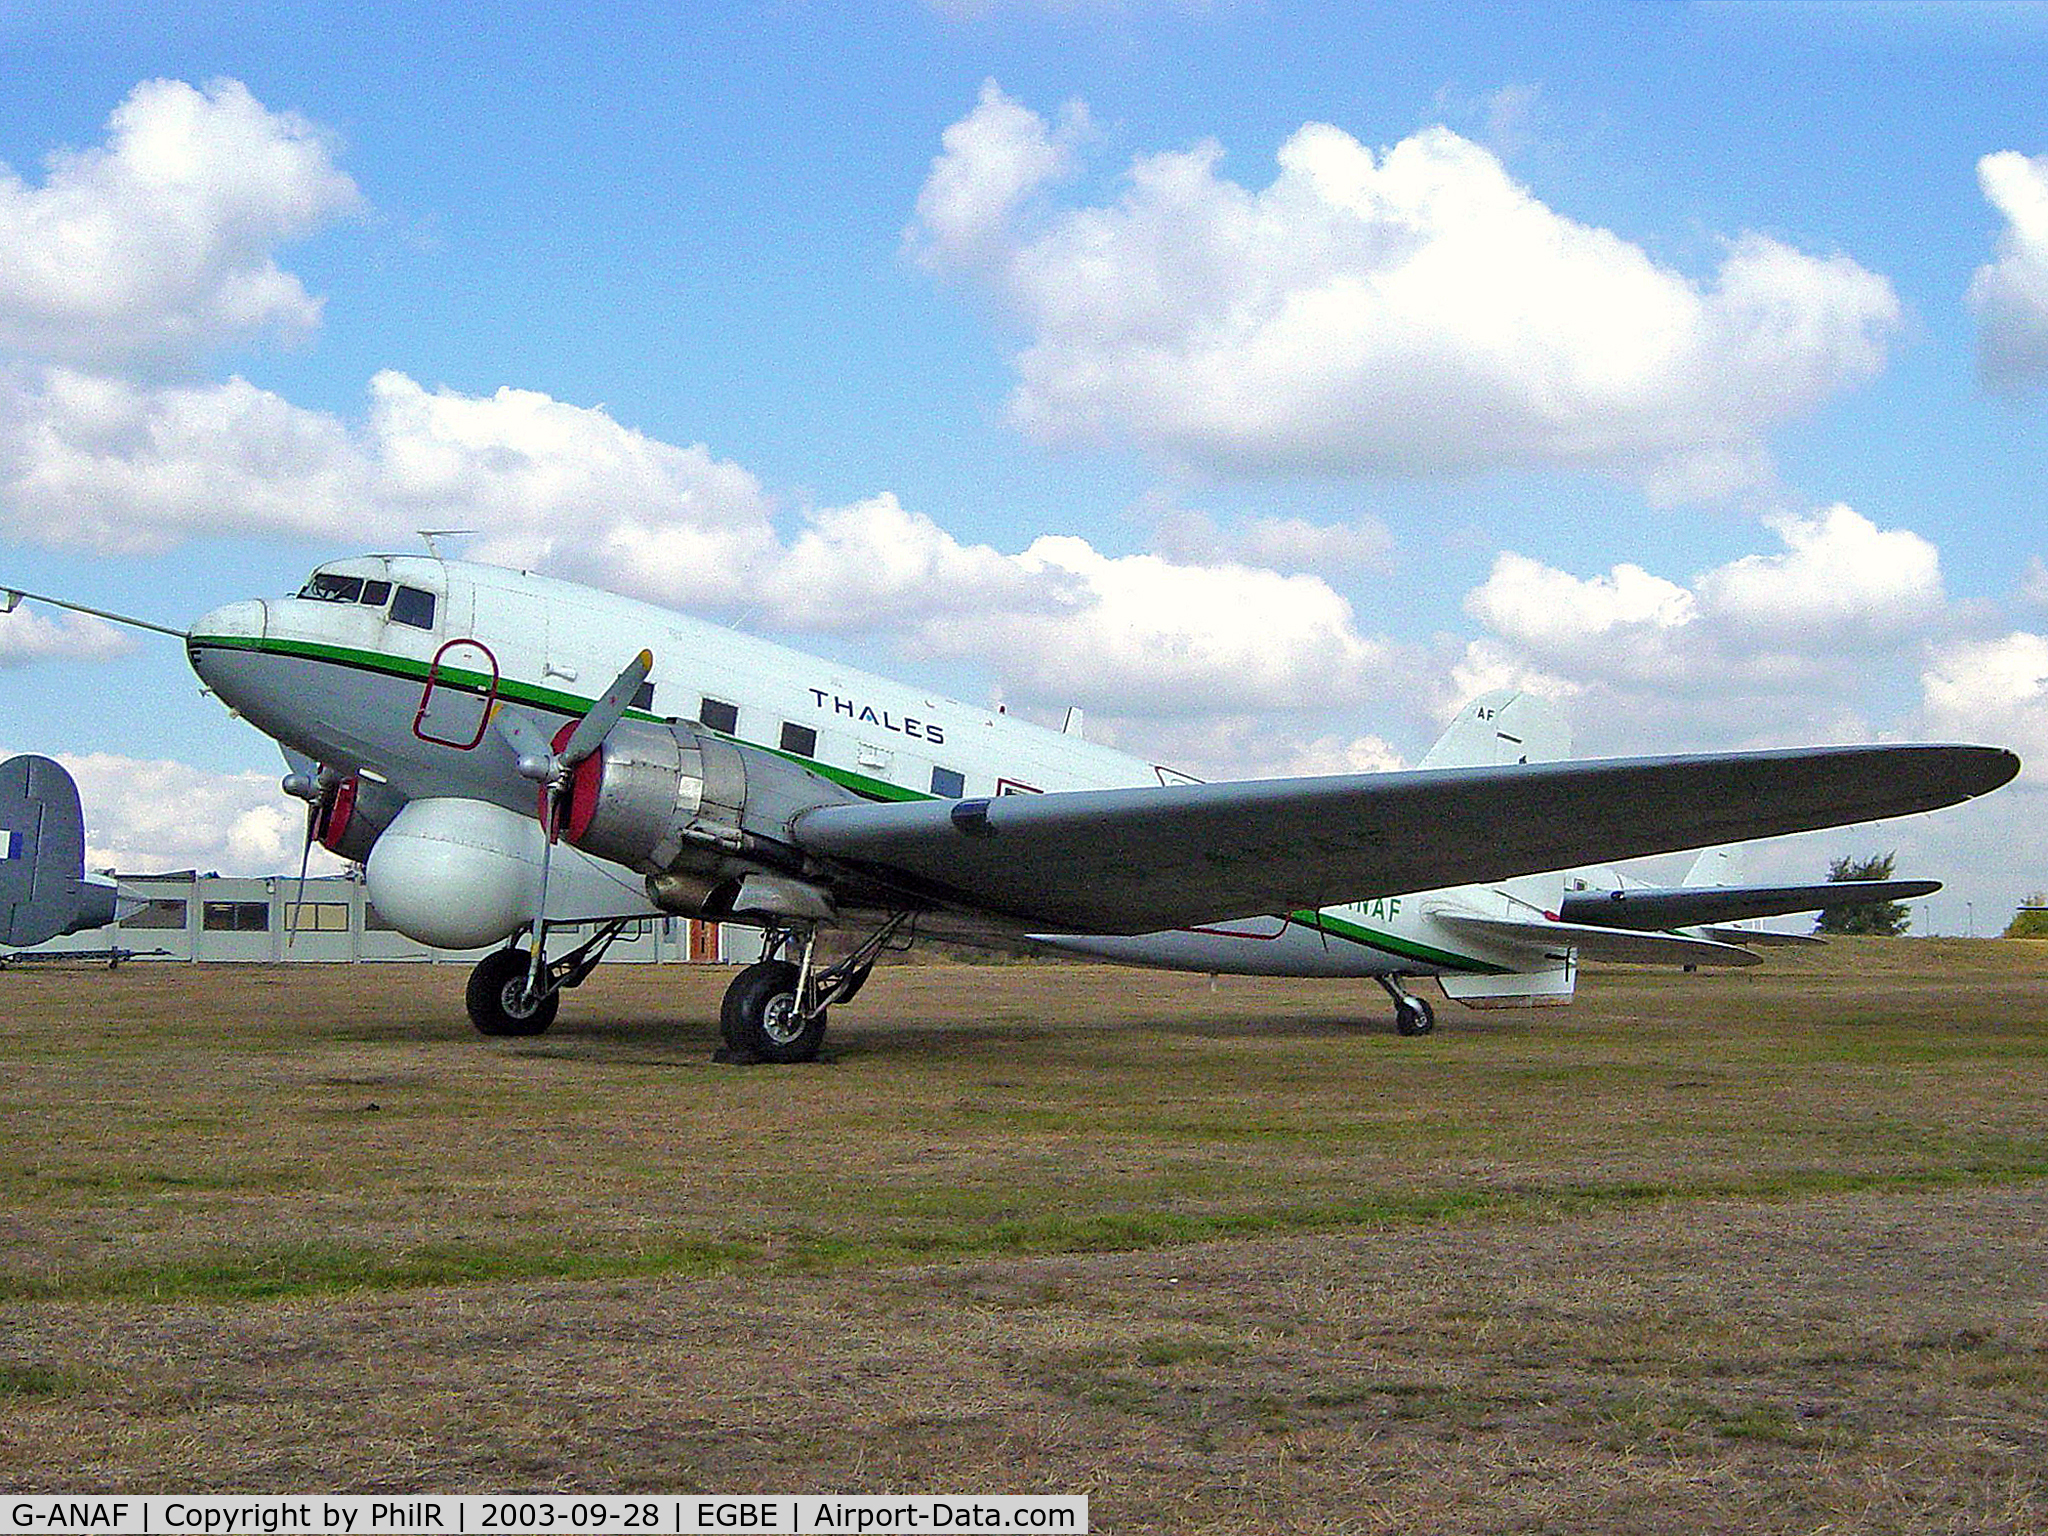 G-ANAF, 1944 Douglas DC-3C-R-1830-90C (C-47B) C/N 33436, Still flying in 2022 in the wartime scheme and markings of KP220.